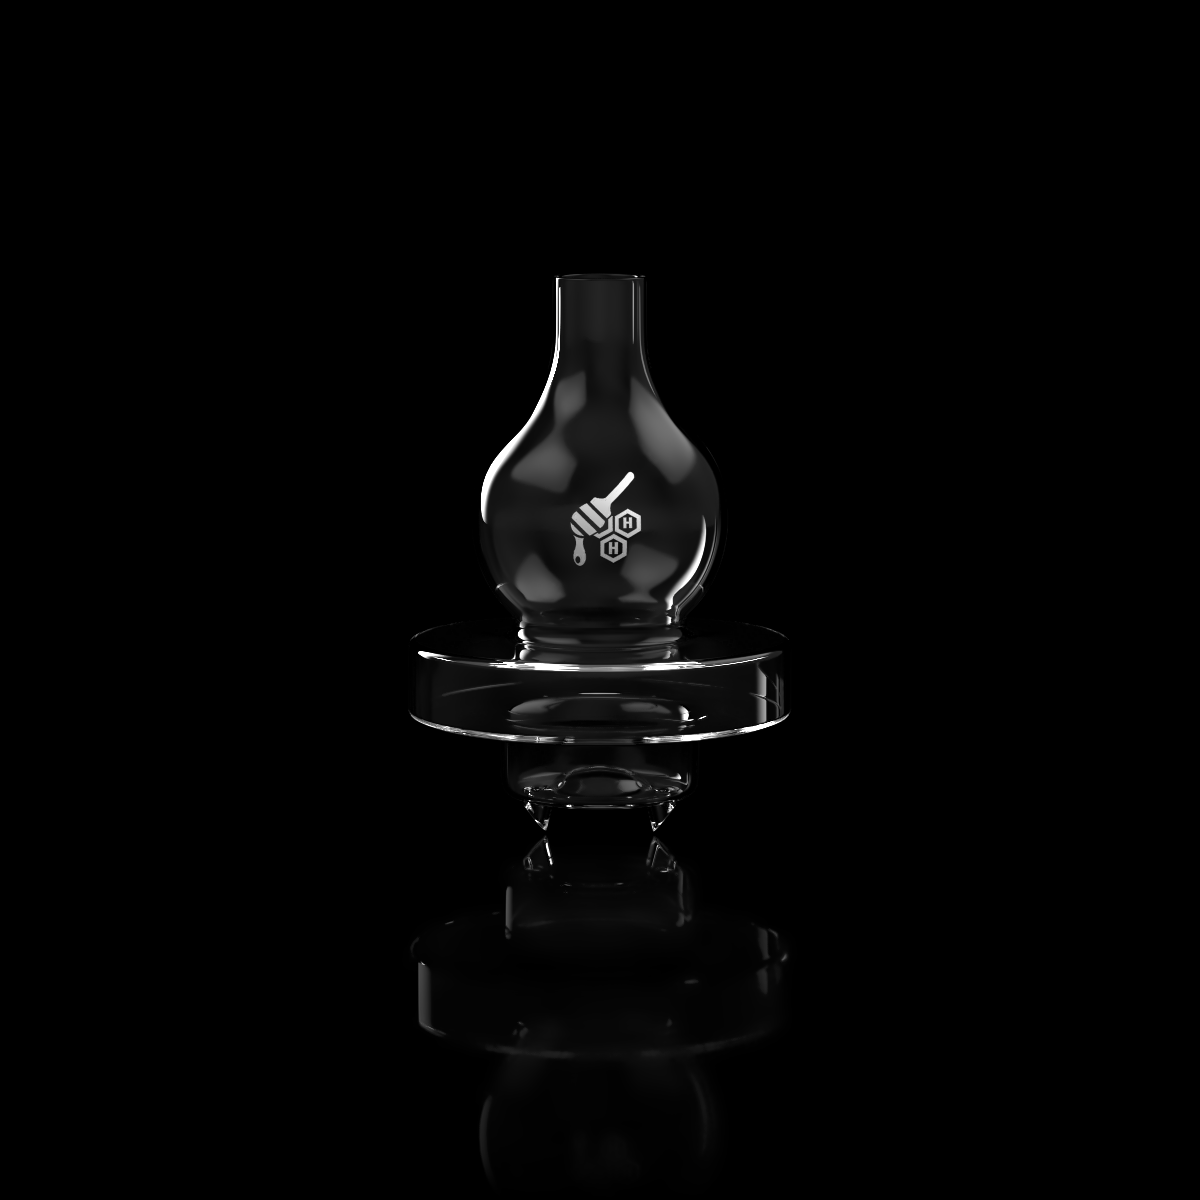 Honeybee Herb Quartz Dual Spinner Carb Cap for Dab Rigs, Clear, Front View on Black Background